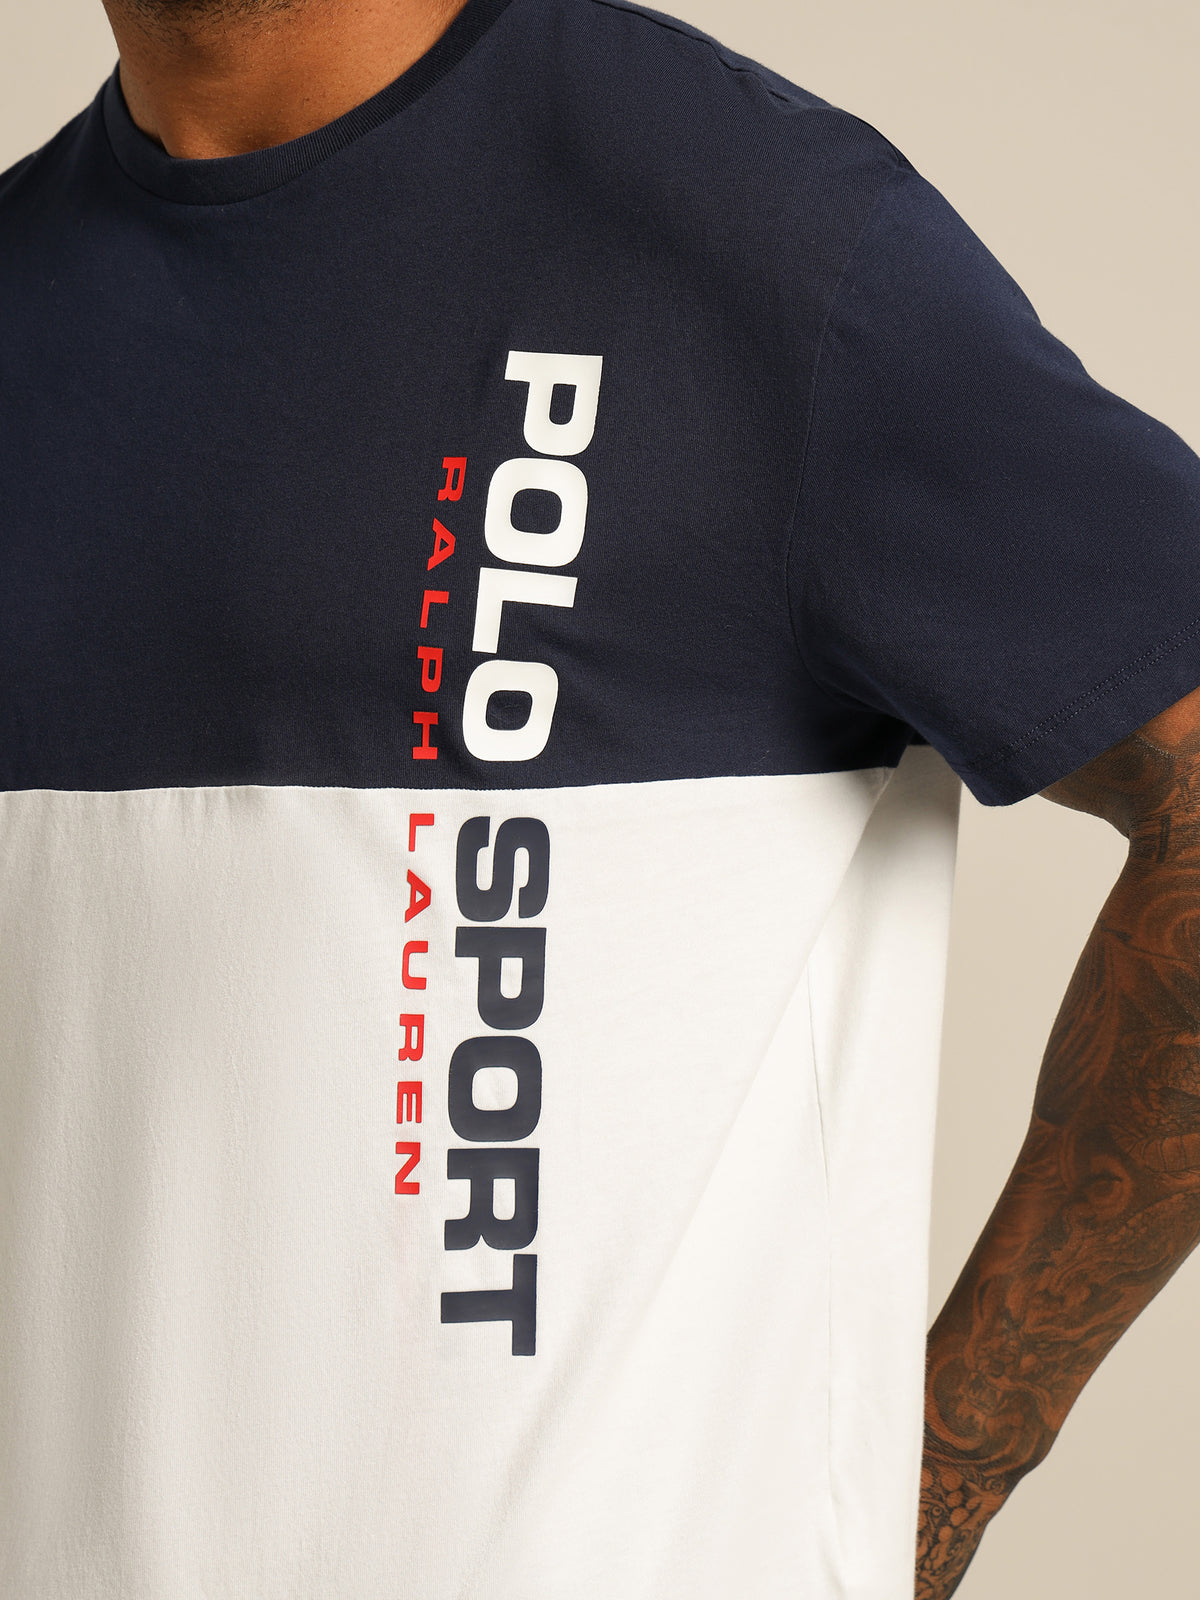 Polo Sport T-Shirt in Navy